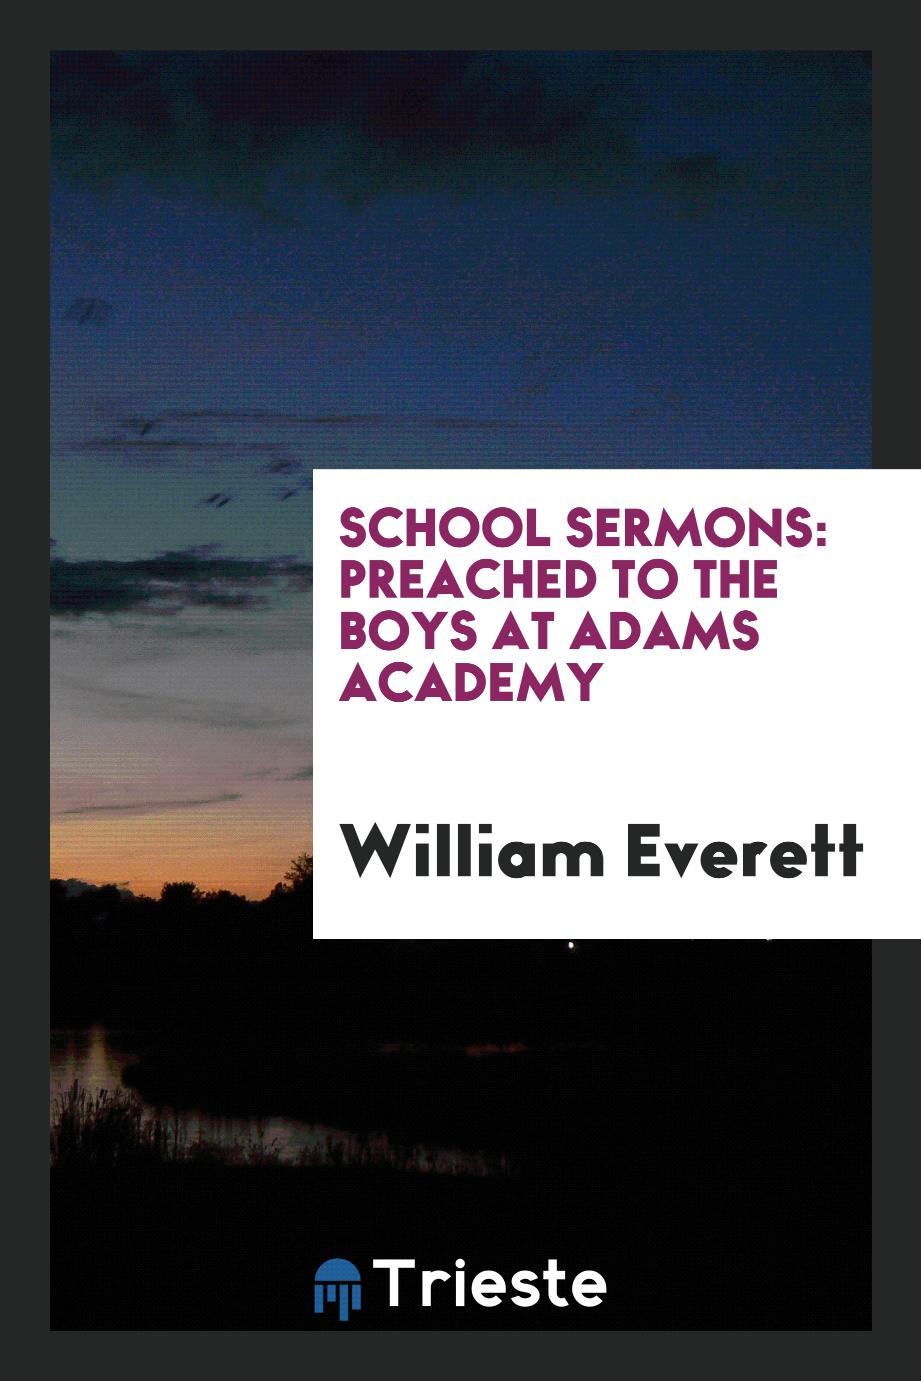 School Sermons: Preached to the Boys at Adams Academy